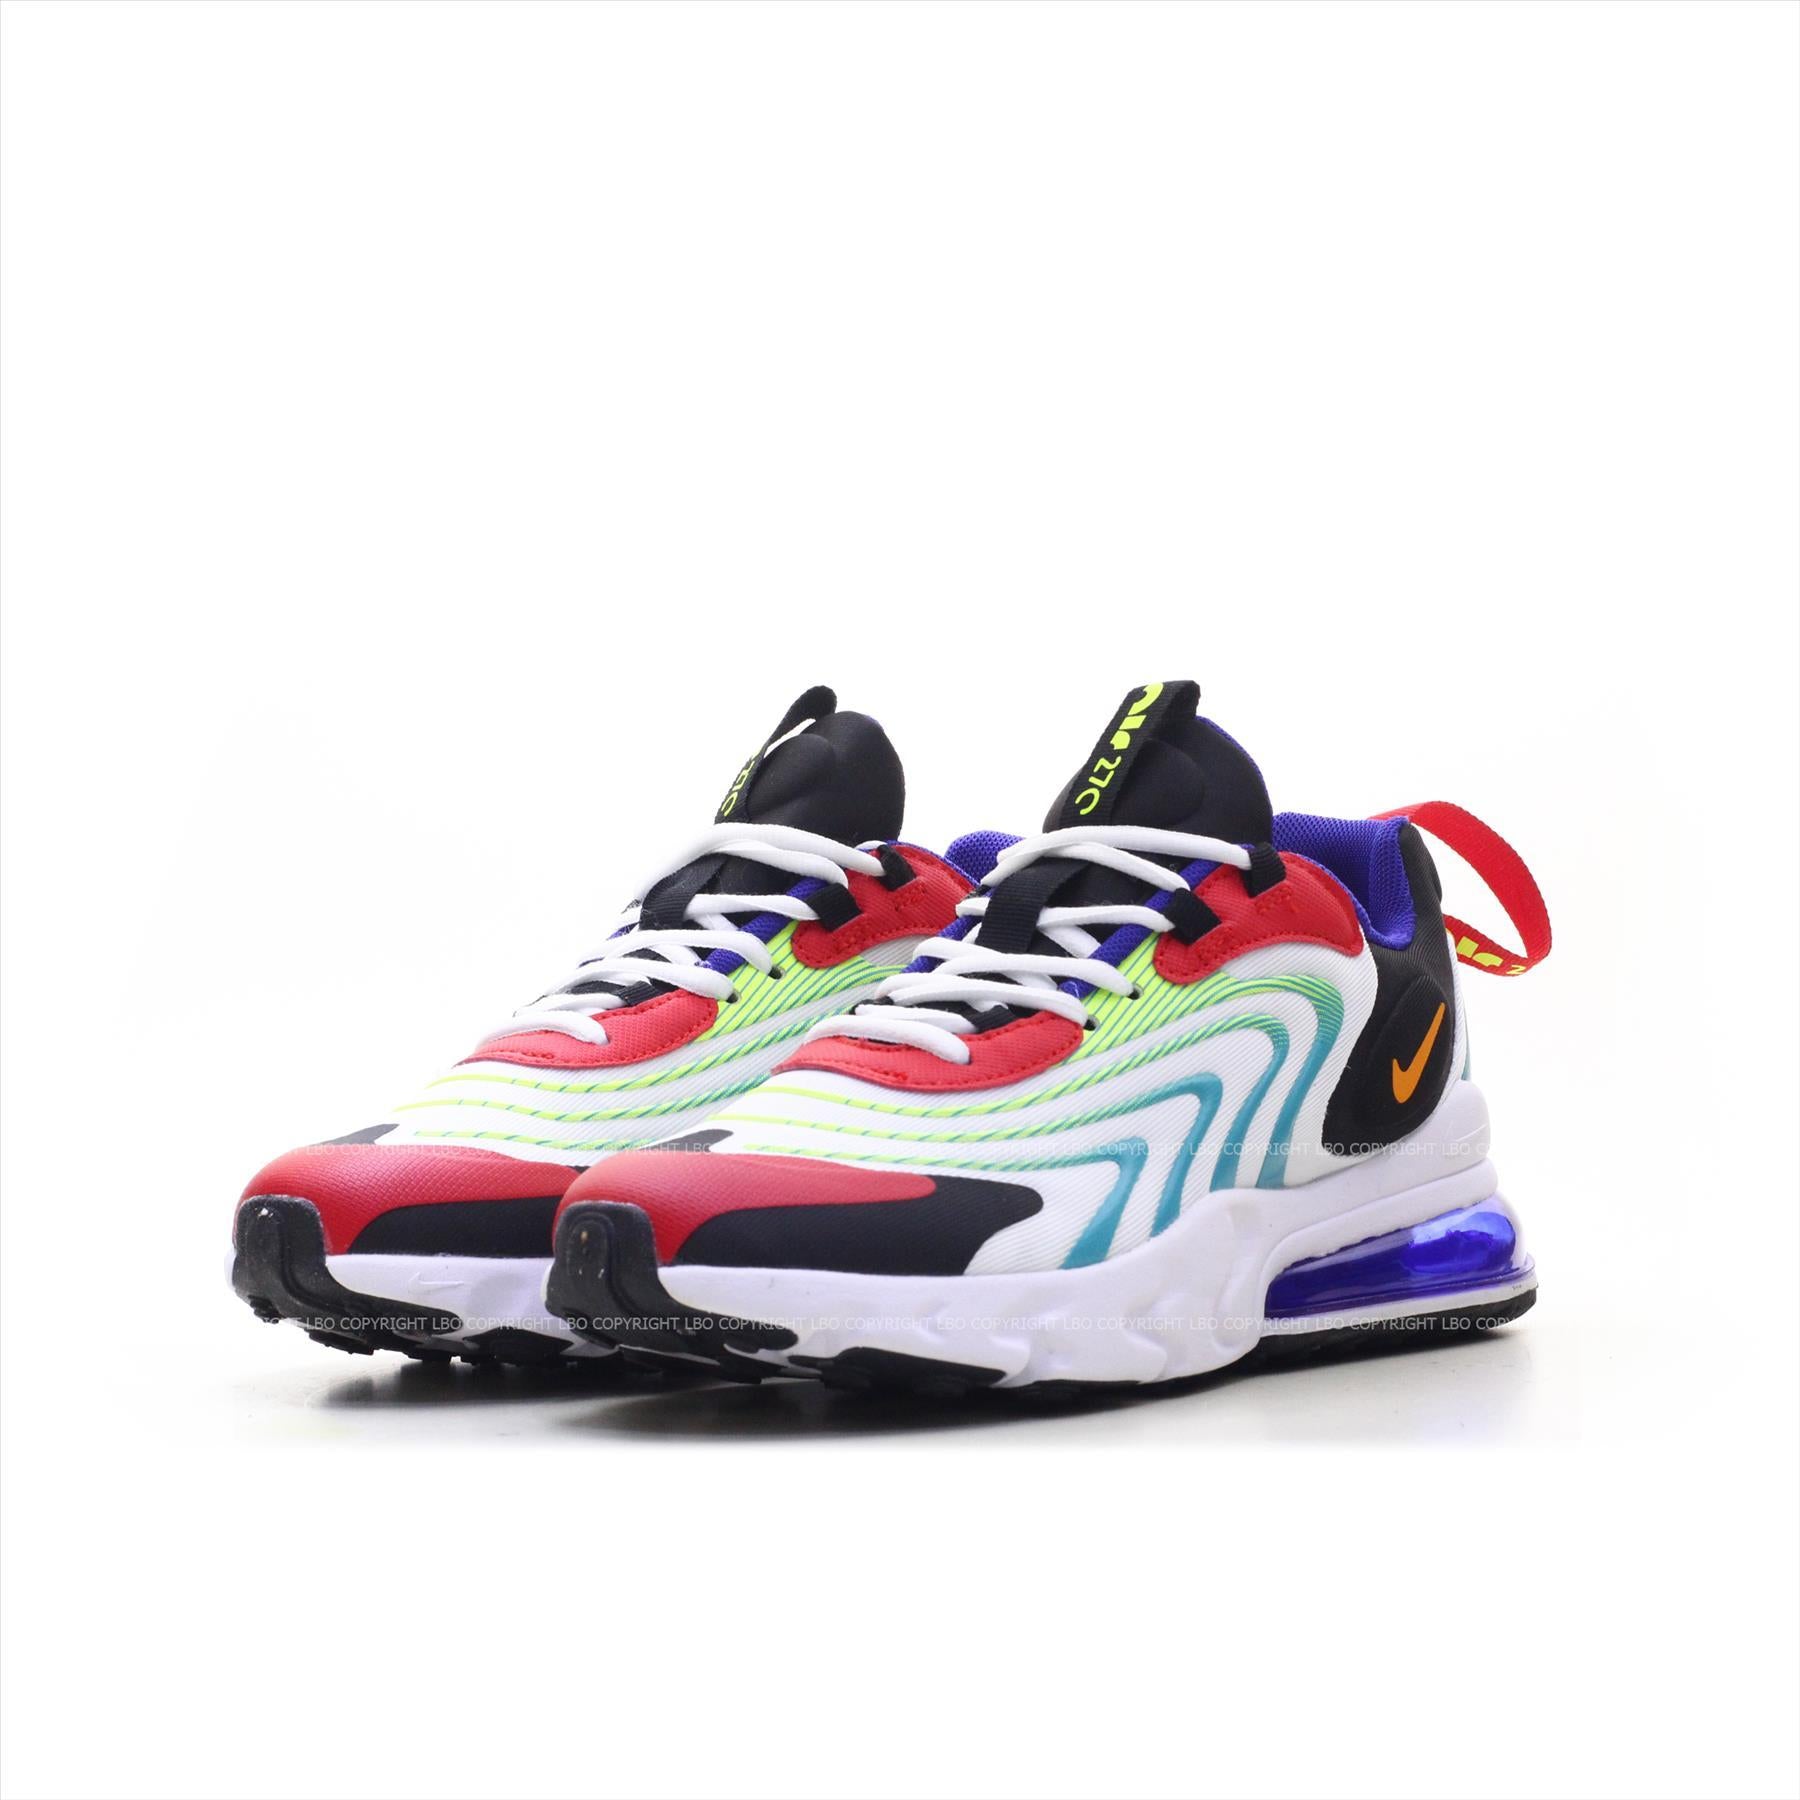 Nike Air Max 270 ENG (NEW FIRST COPY)